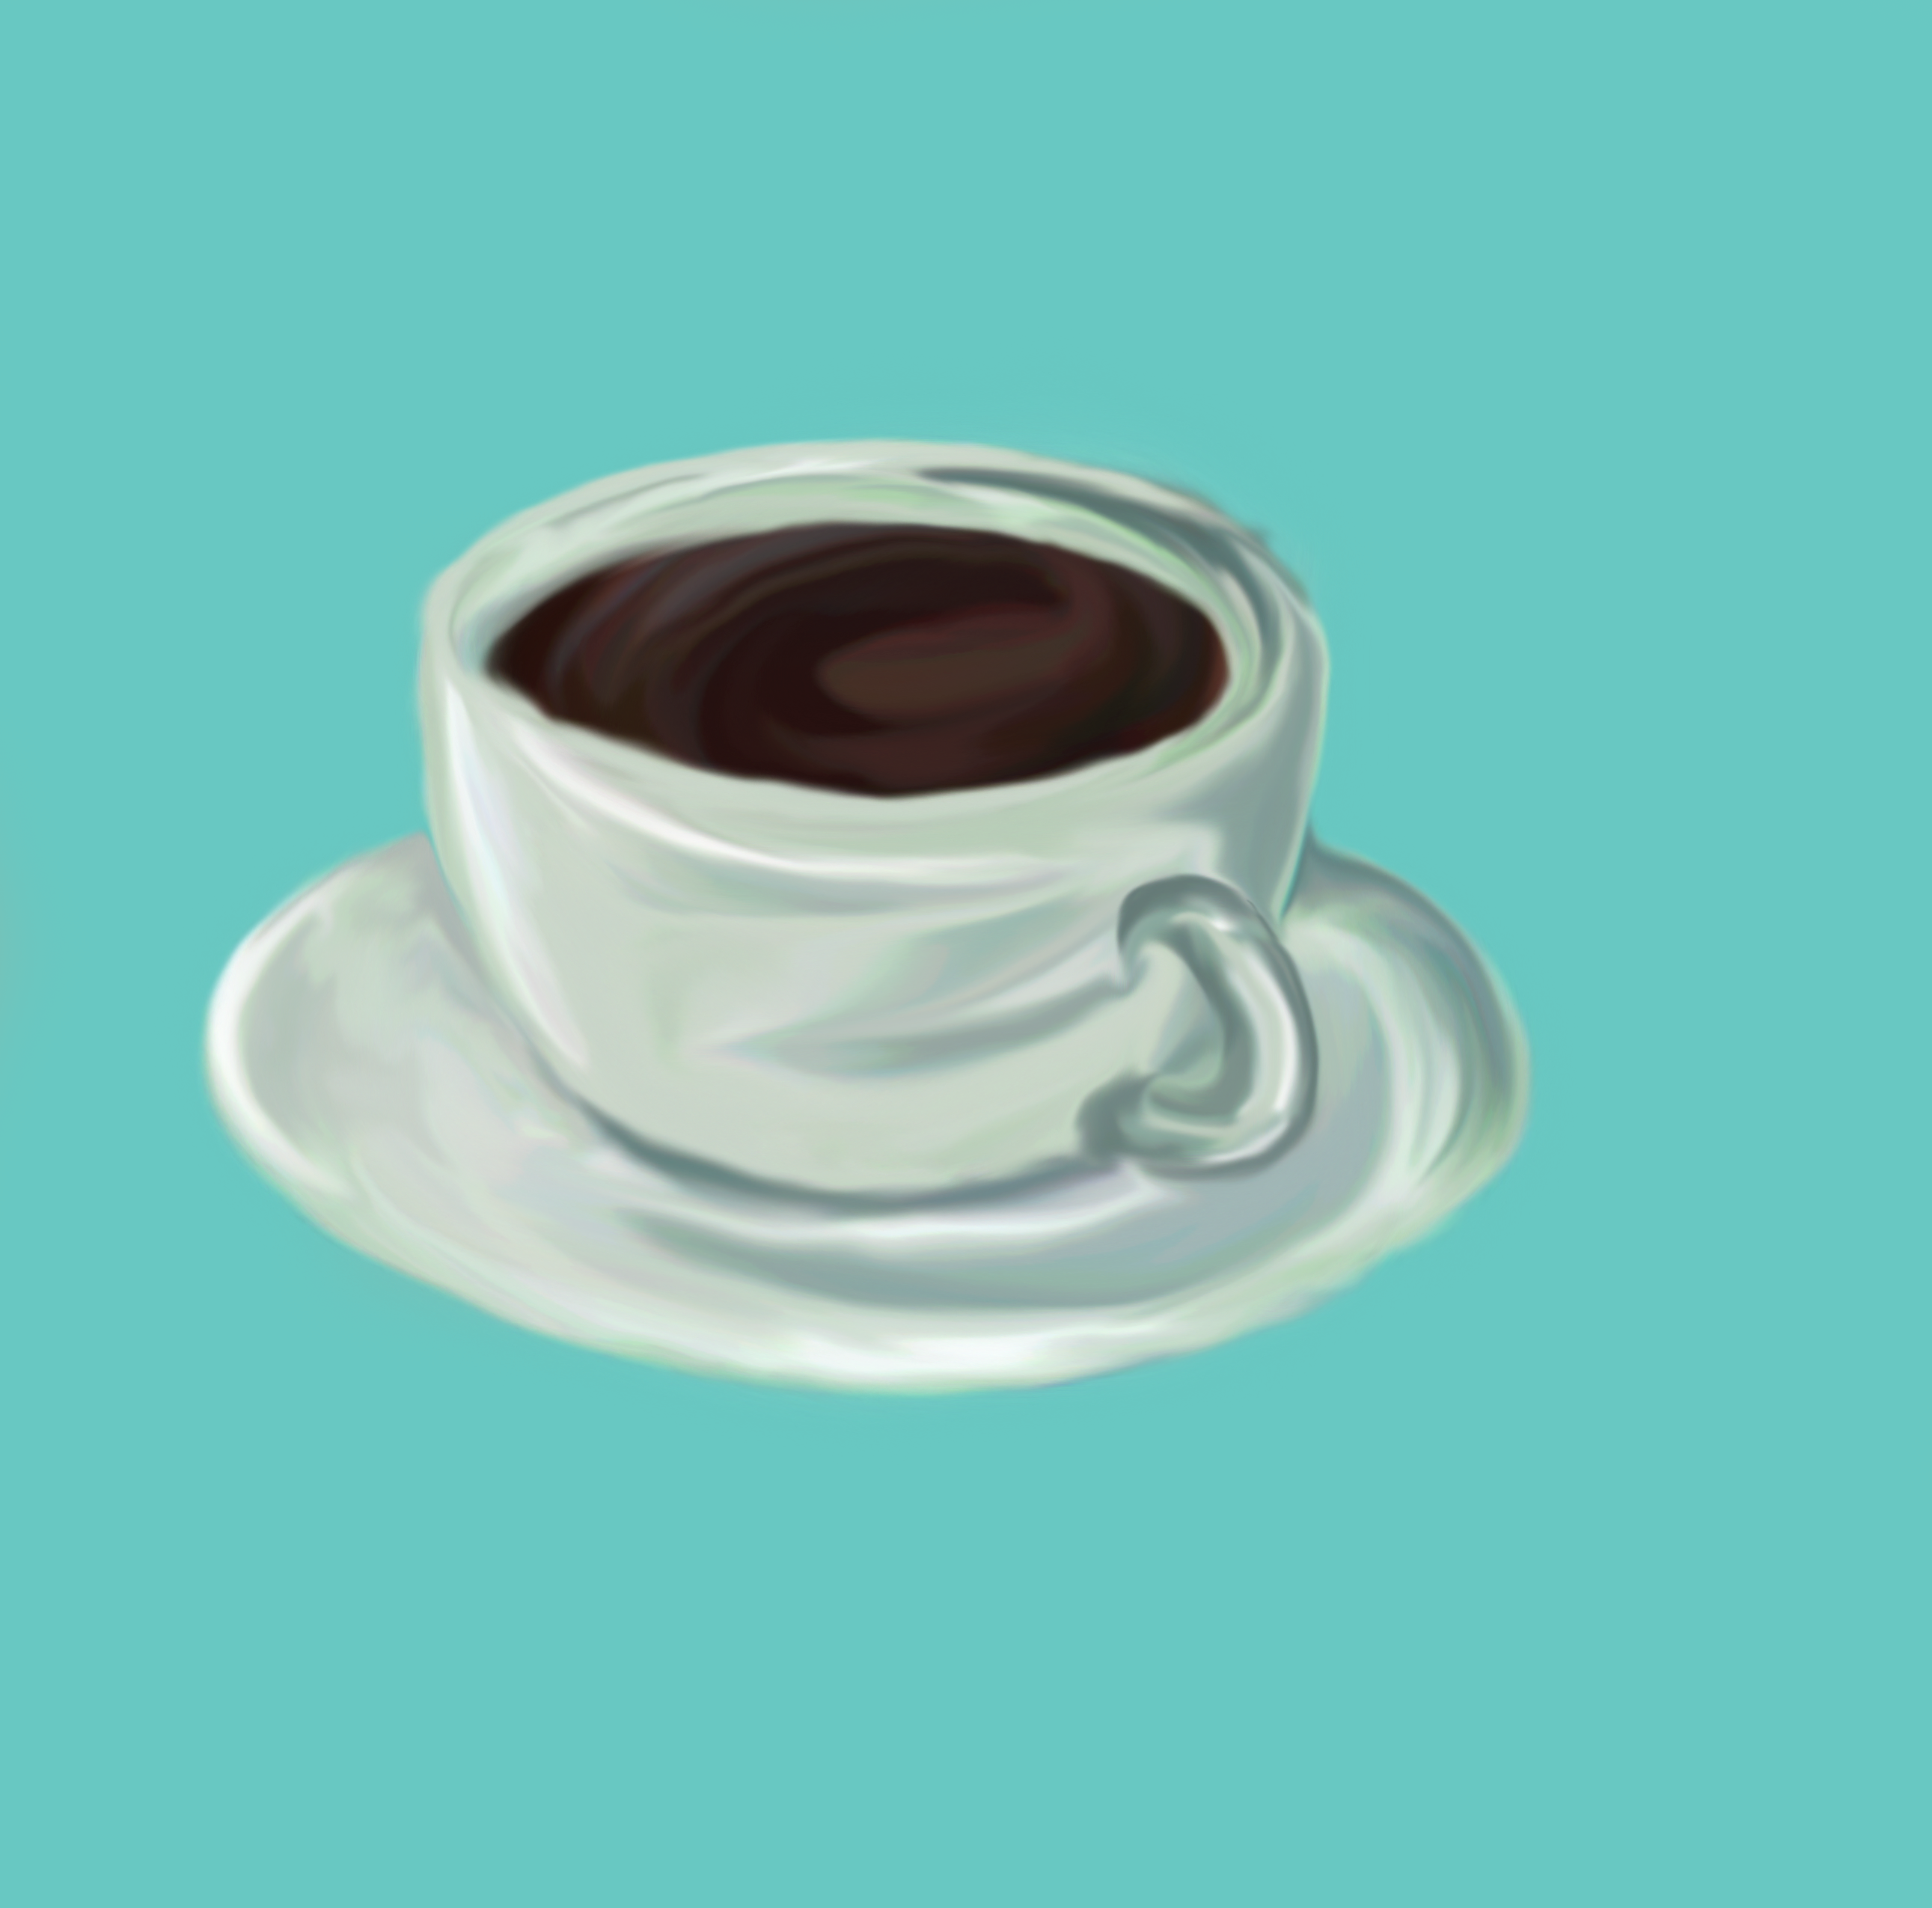 coffee in teal cup